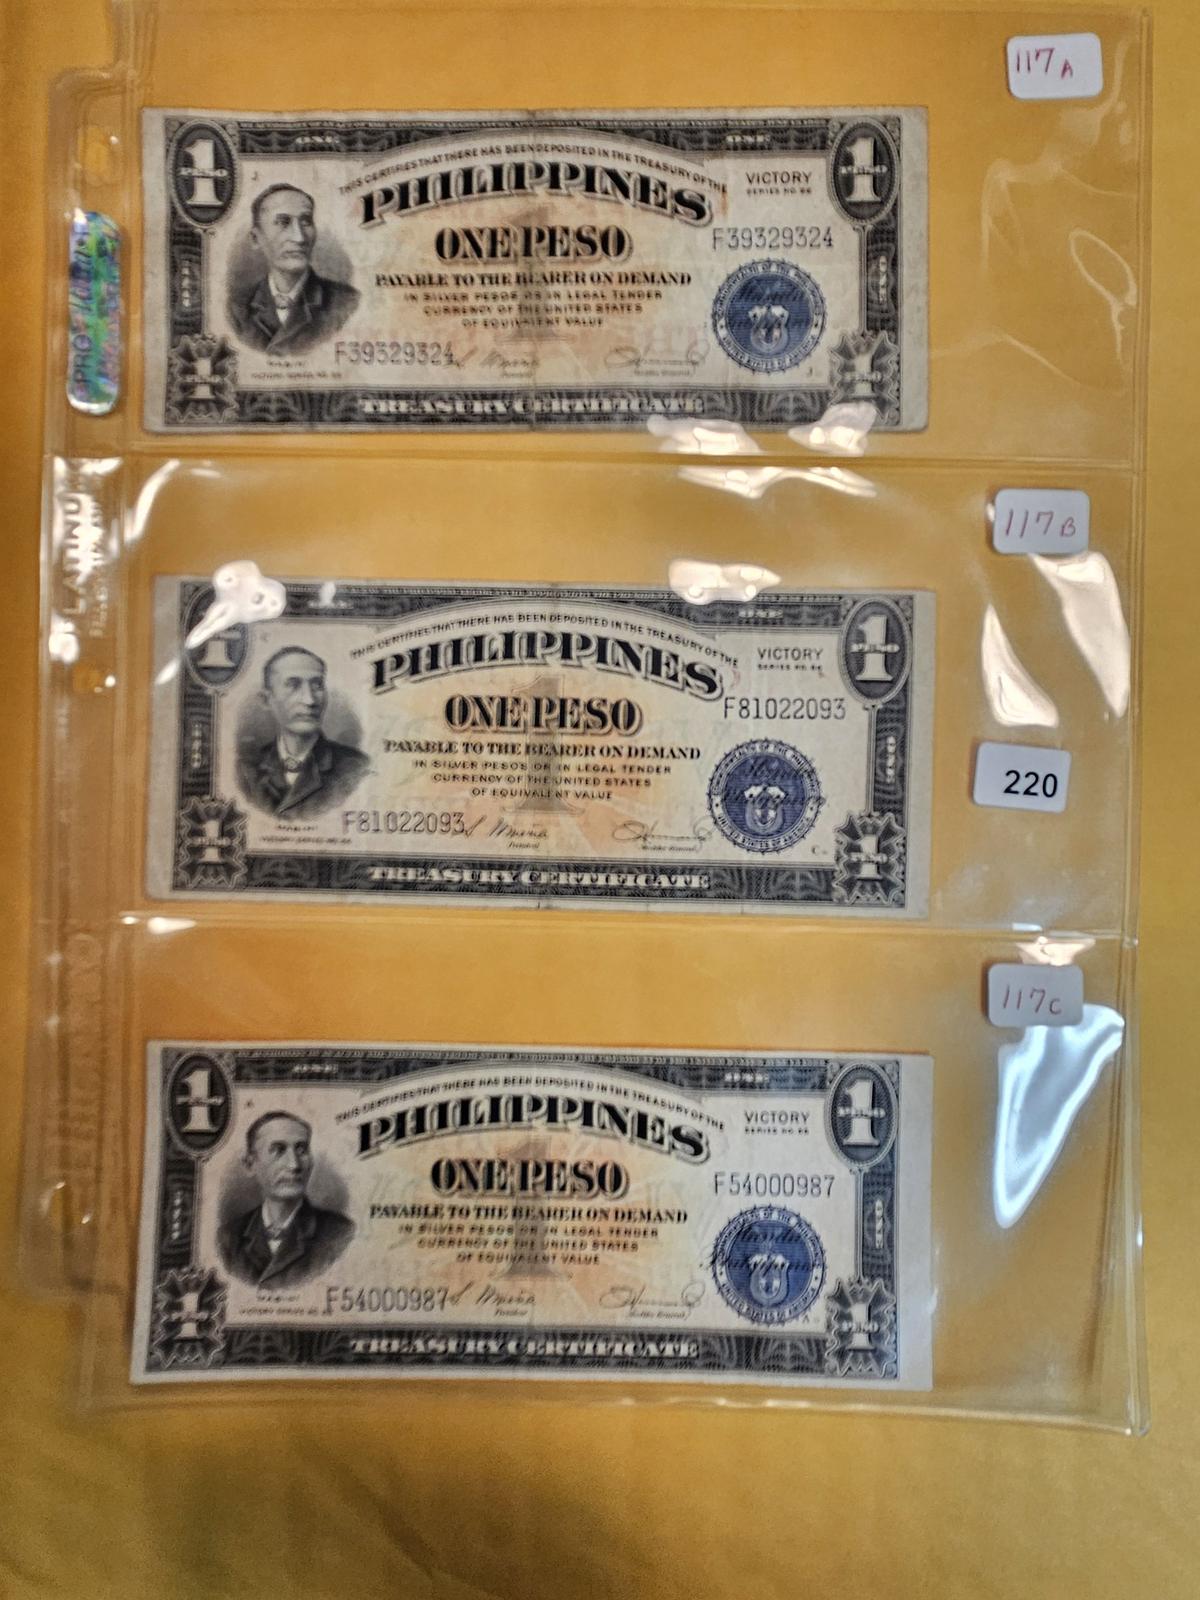 Six more Philippines notes